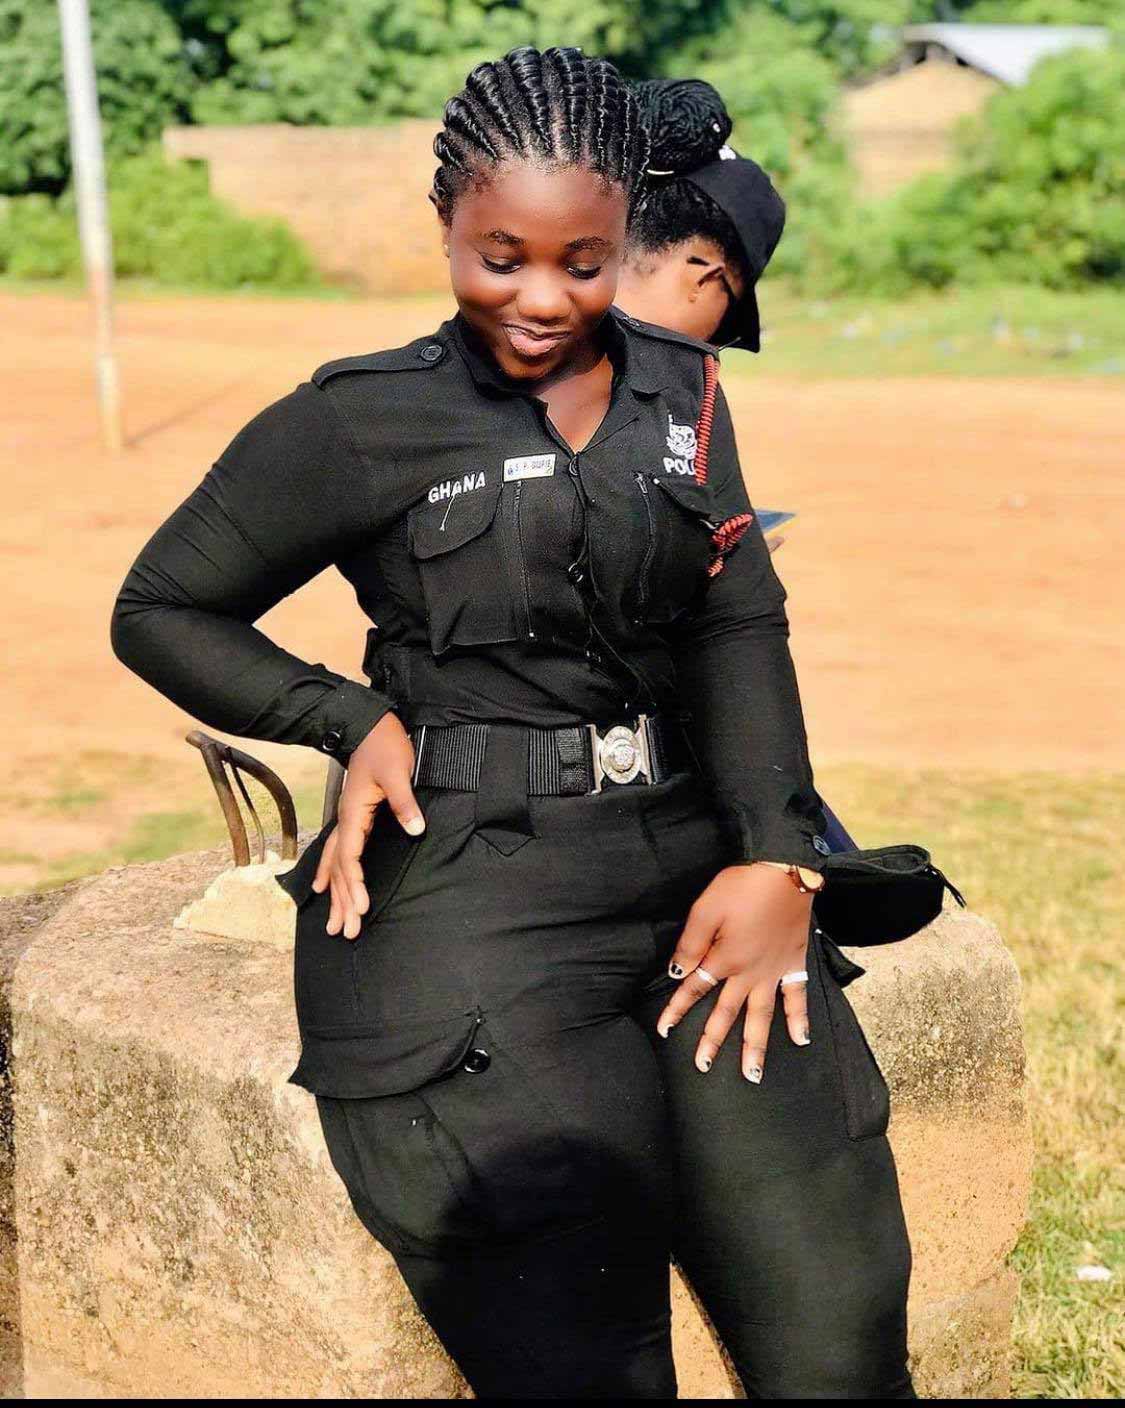 Photos Of Ama Serwaa The Trending Ghanaian Police Officer Tagged As The Most Beautiful 